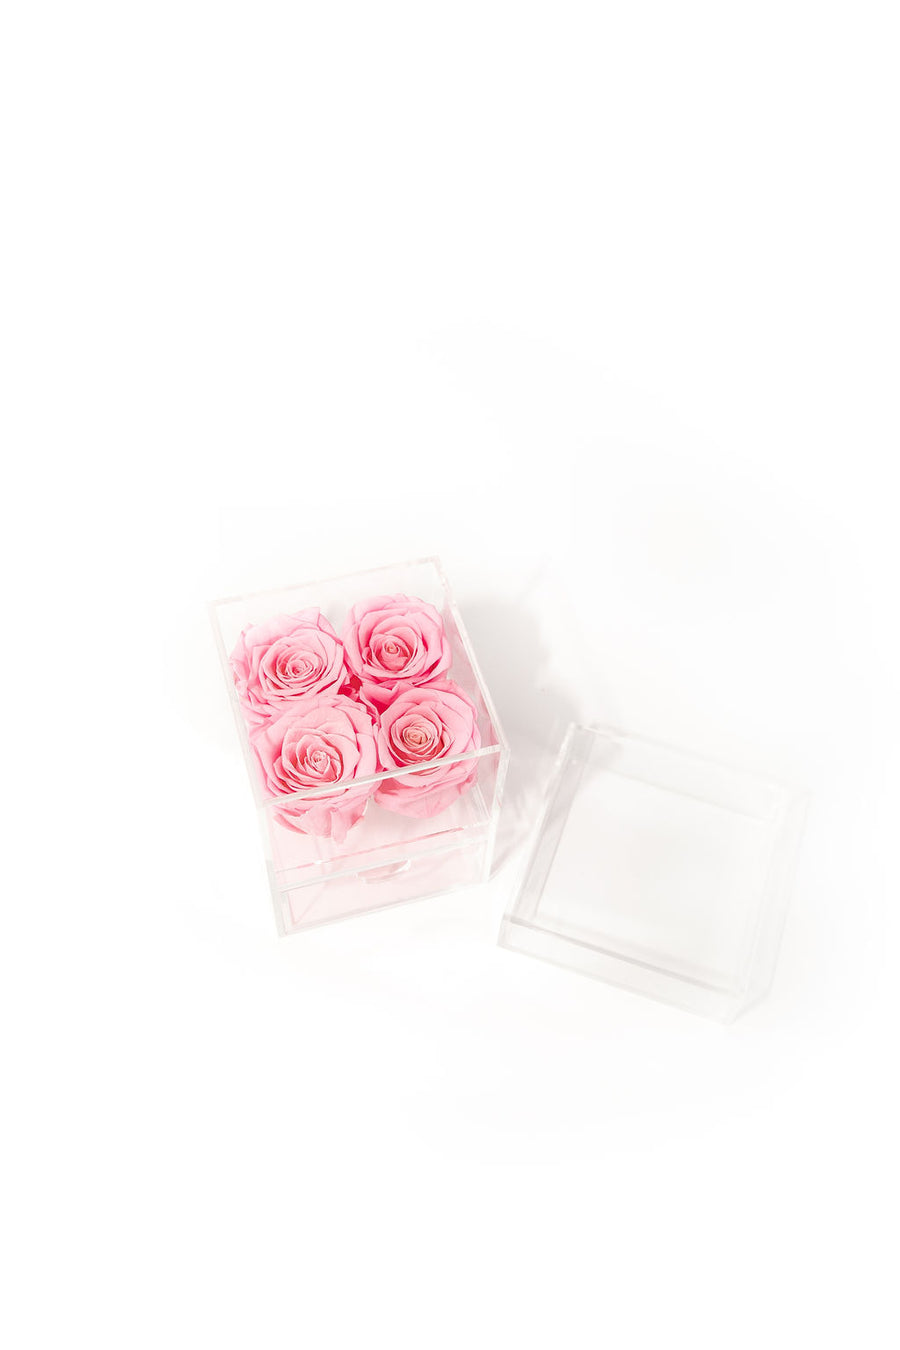 PINK FOUR PRESERVED ROSES